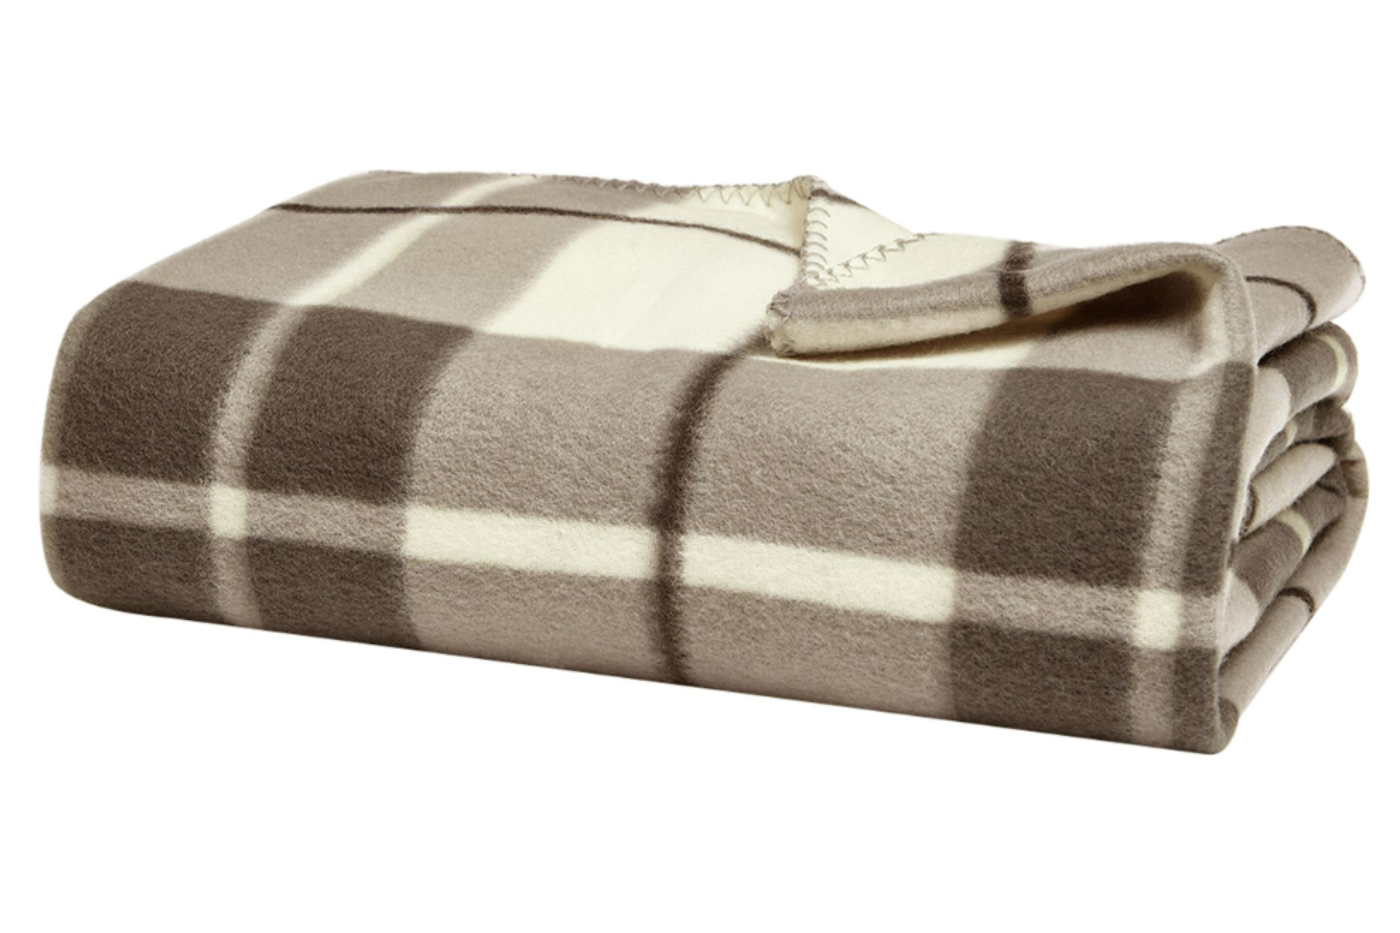 View Natural Checked Fleece Blanket 3 Sizes information